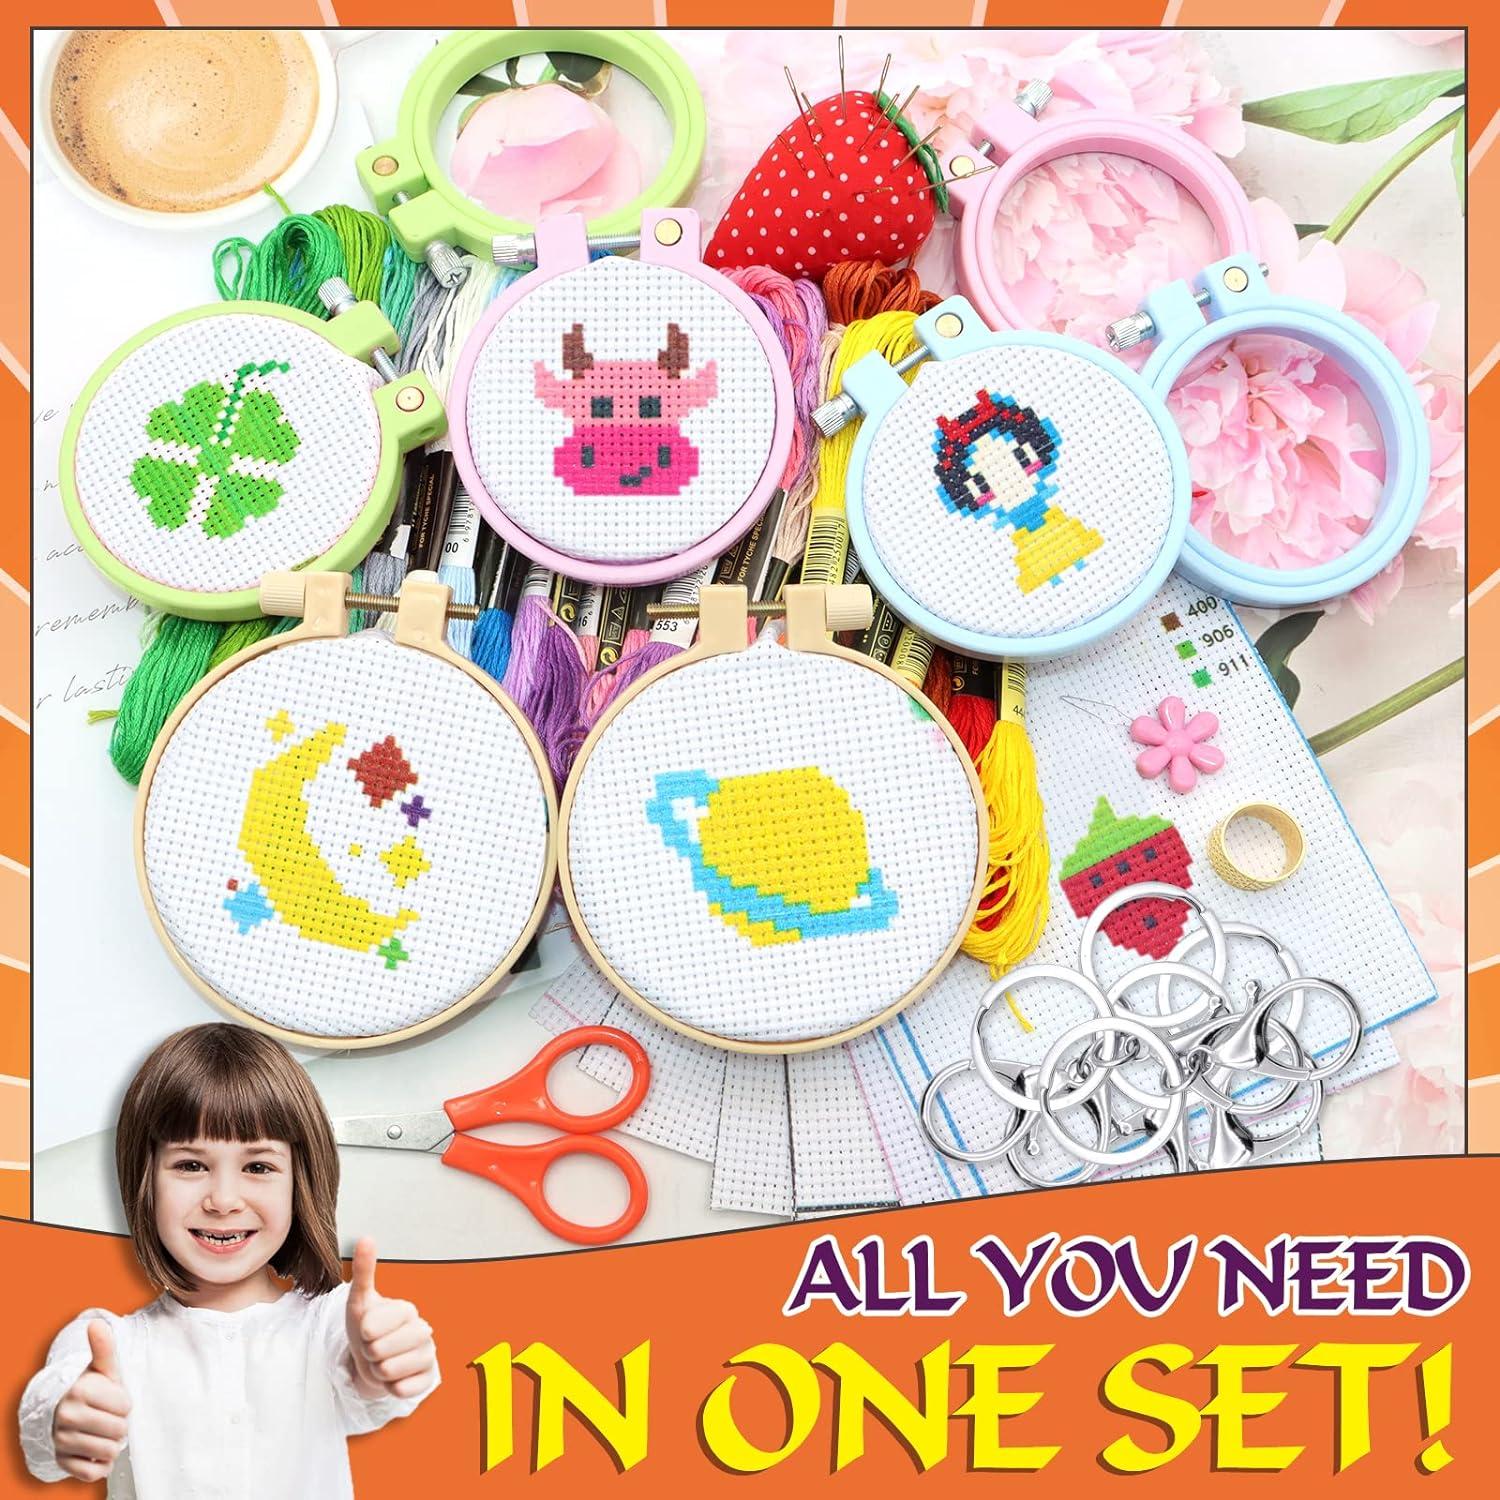 ZOCONE 12 PCS Cross Stitch Kits for Kids 7-13, Cross Stitch Beginner Kits  with Instructions, Keychains, Embroidery Hoops and Tools, Needlepointing